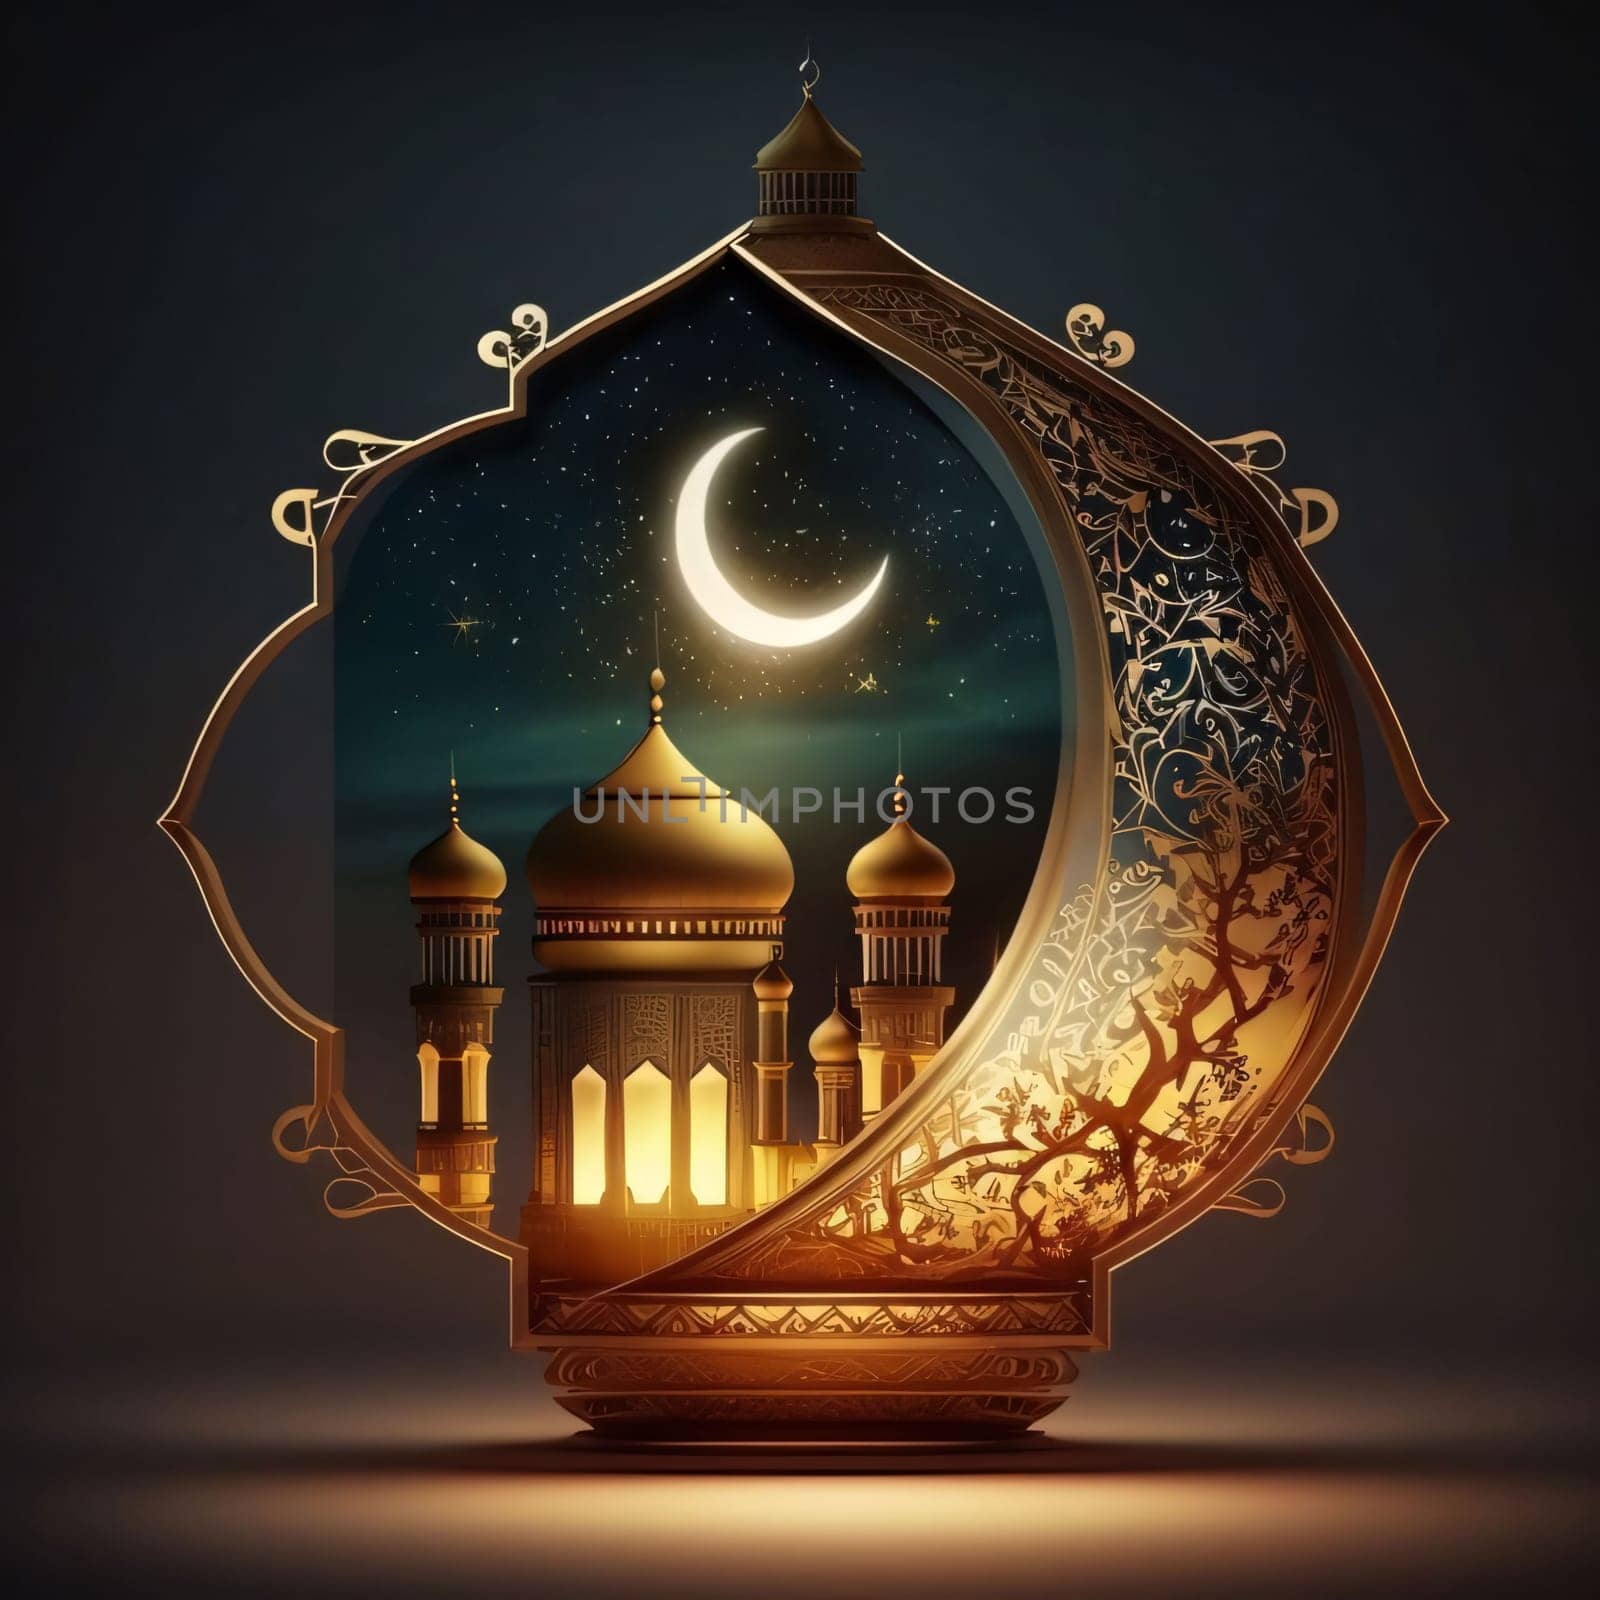 Towers matches here Crescent in lantern dark background. Lantern as a symbol of Ramadan for Muslims. A time to meet with God.